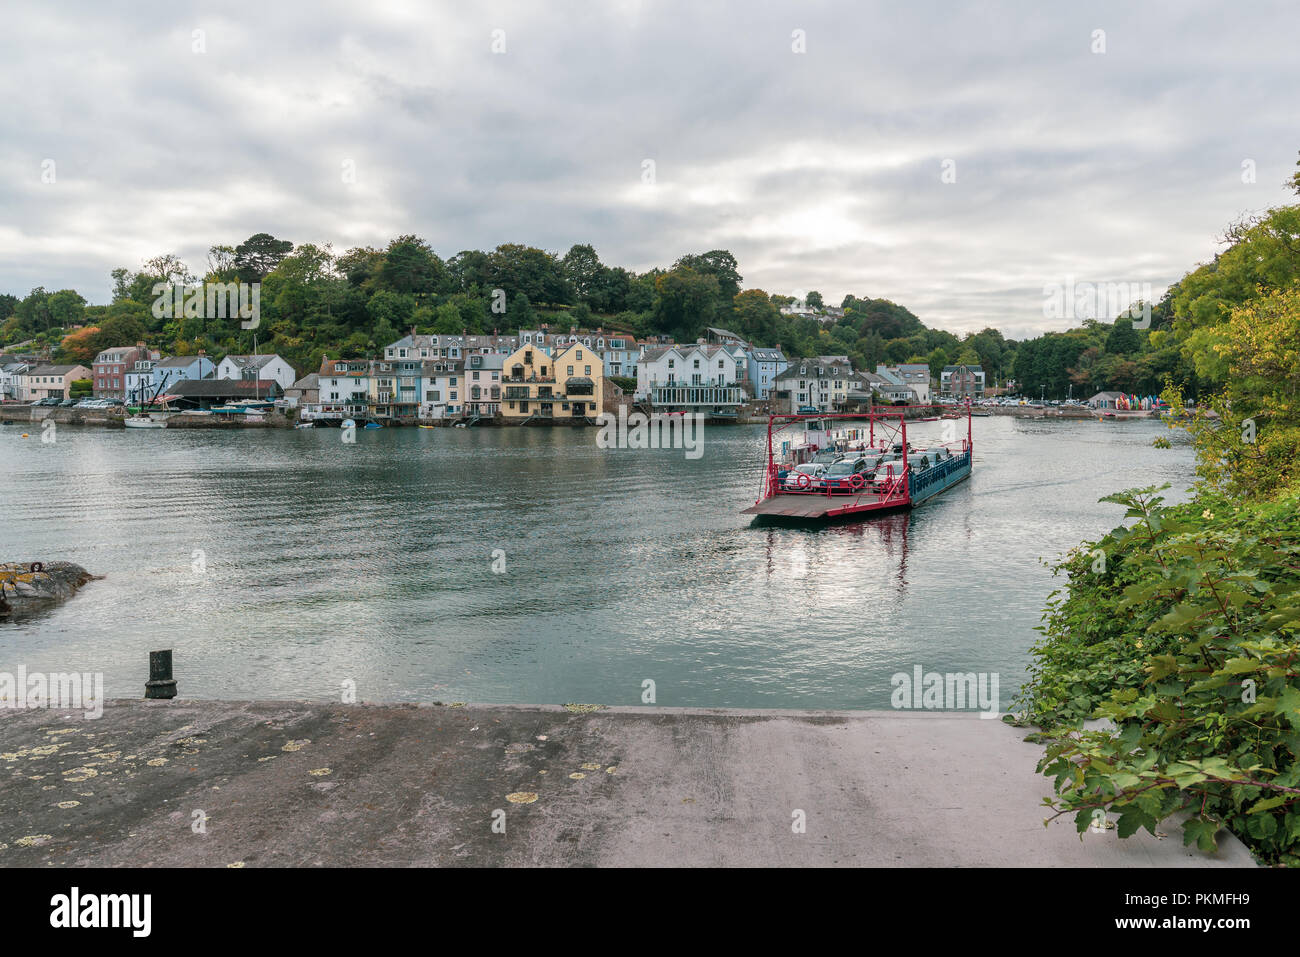 A ferry transports cars and people across the River Fowey from Fowey to Bodinnick, Cornwall, England, UK Stock Photo